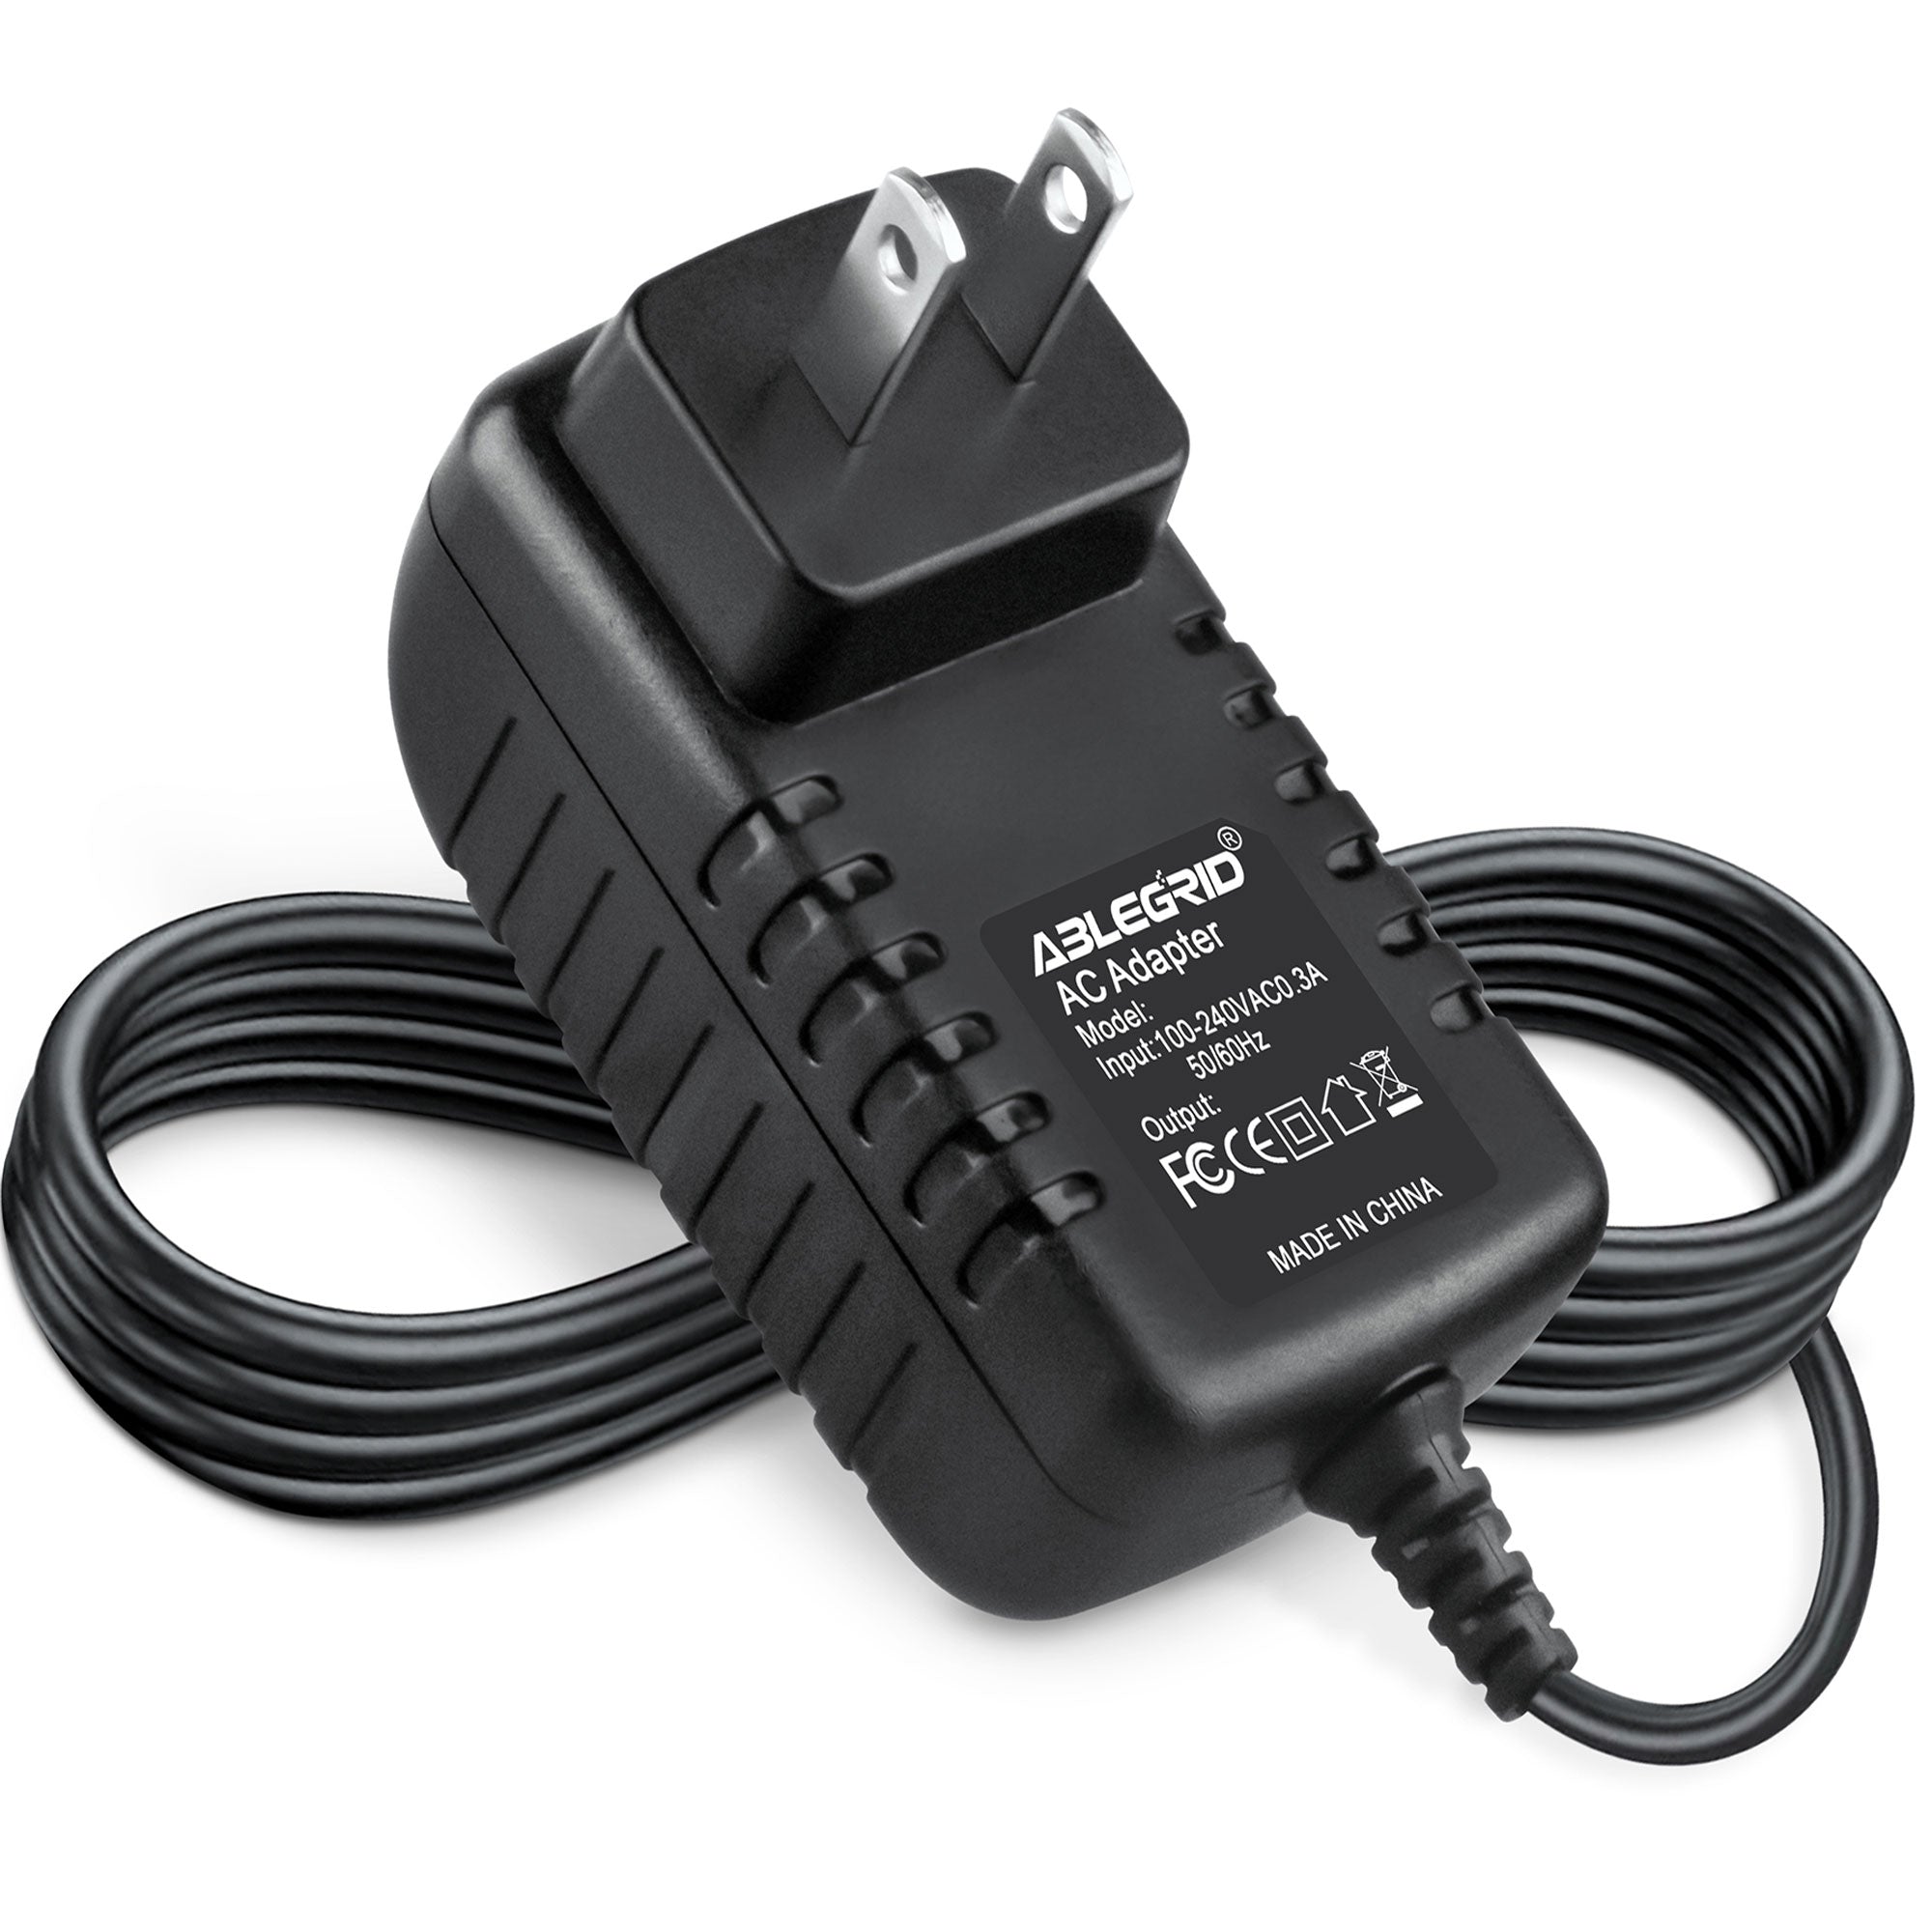 AbleGrid AC-DC Adapter for WAXON P/N: QPA1413 AD-1220M AD 1220M Power Supply Cord Cable PS Wall Home Charger Input: 100 - 240 VAC 50/60Hz Worldwide Voltage Use Mains PSU